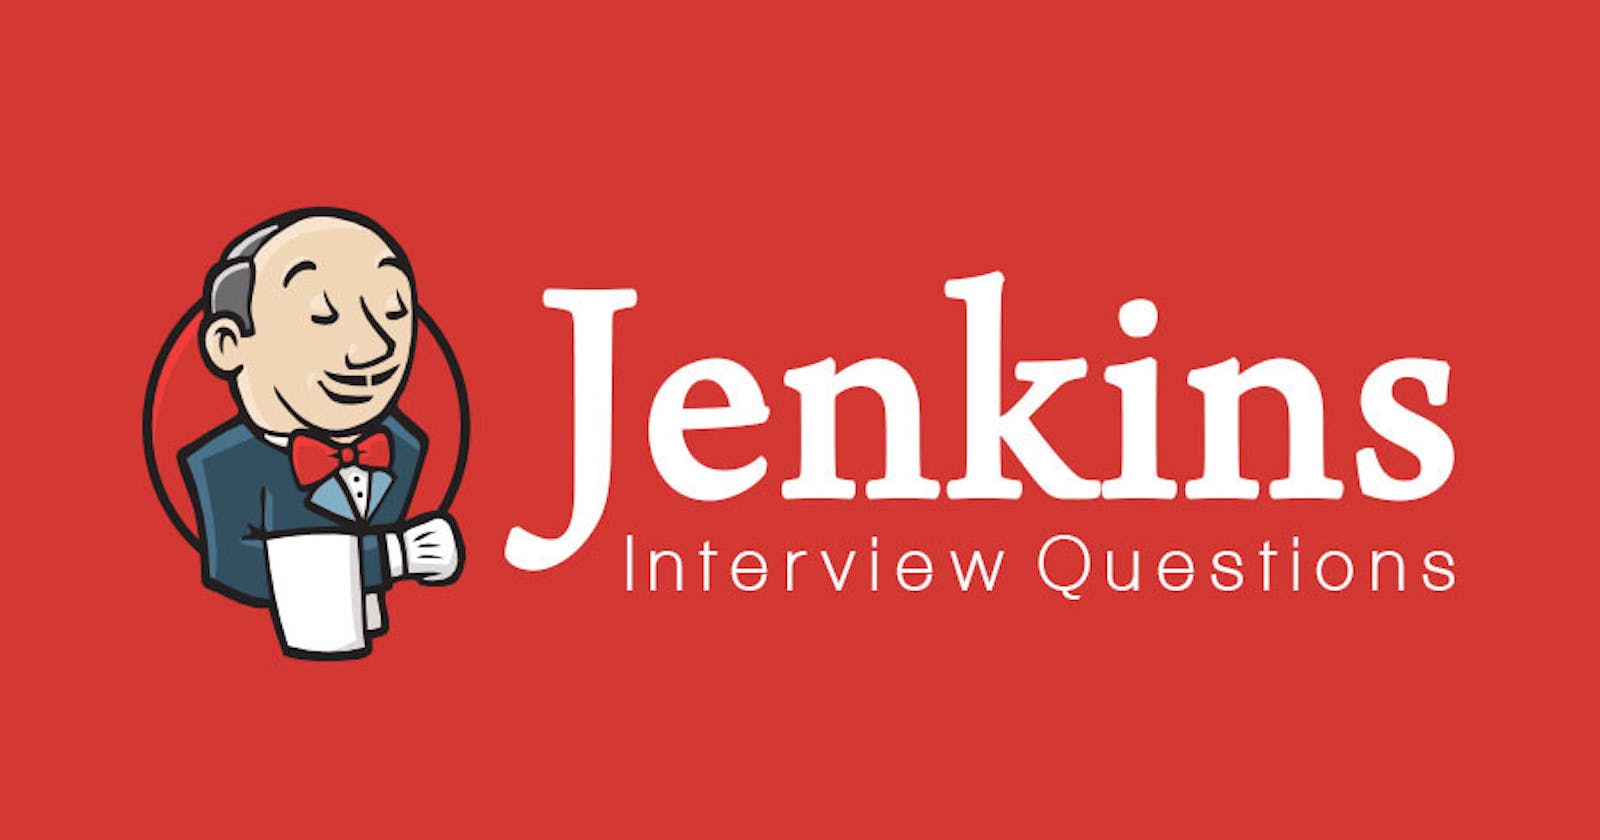 Jenkins Interview Questions and Answers